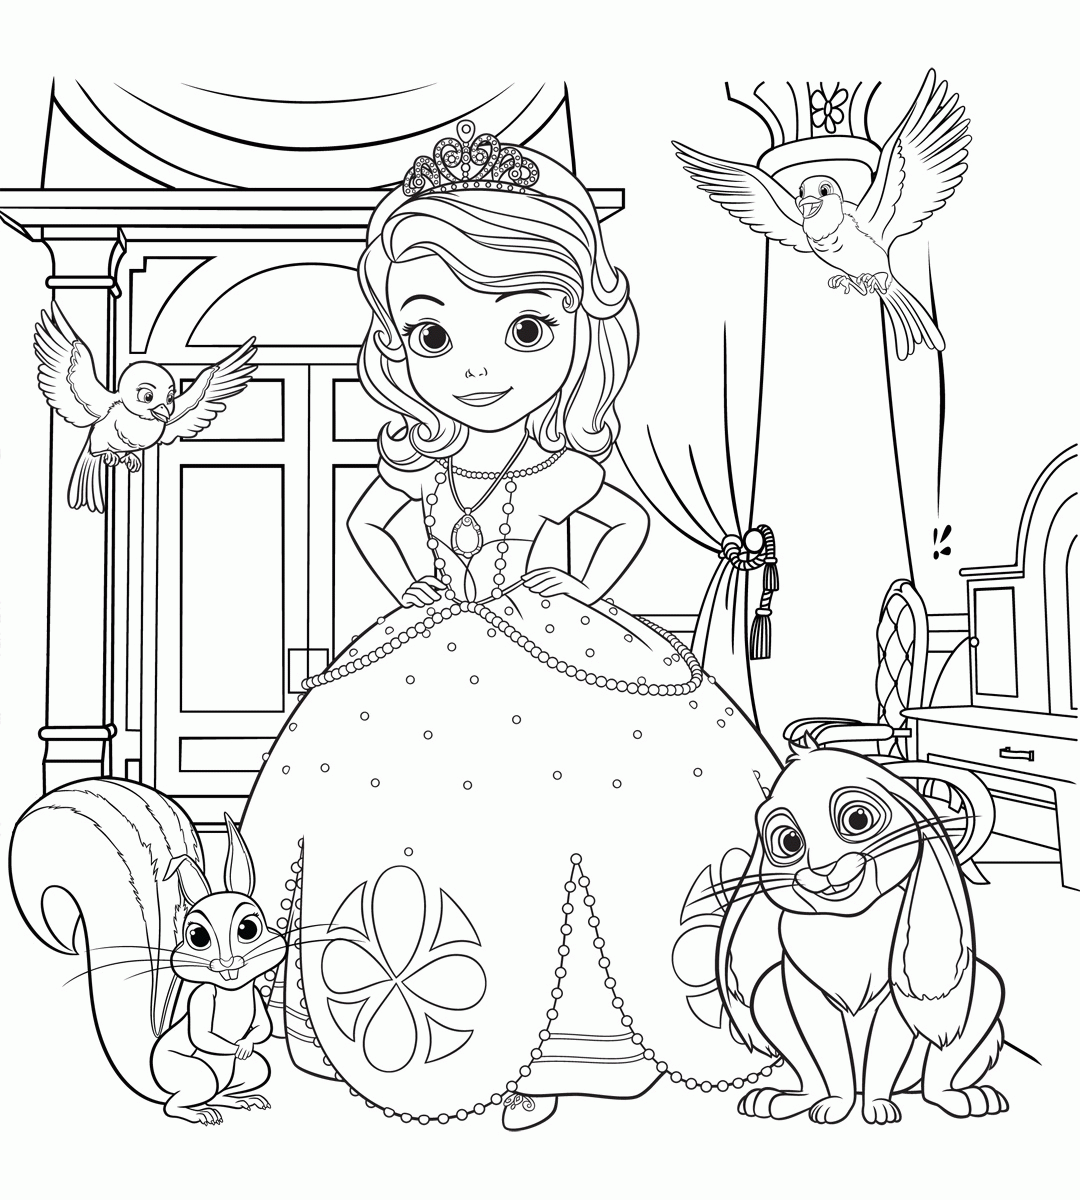 sofia-the-first-coloring-pages-best-coloring-pages-for-kids